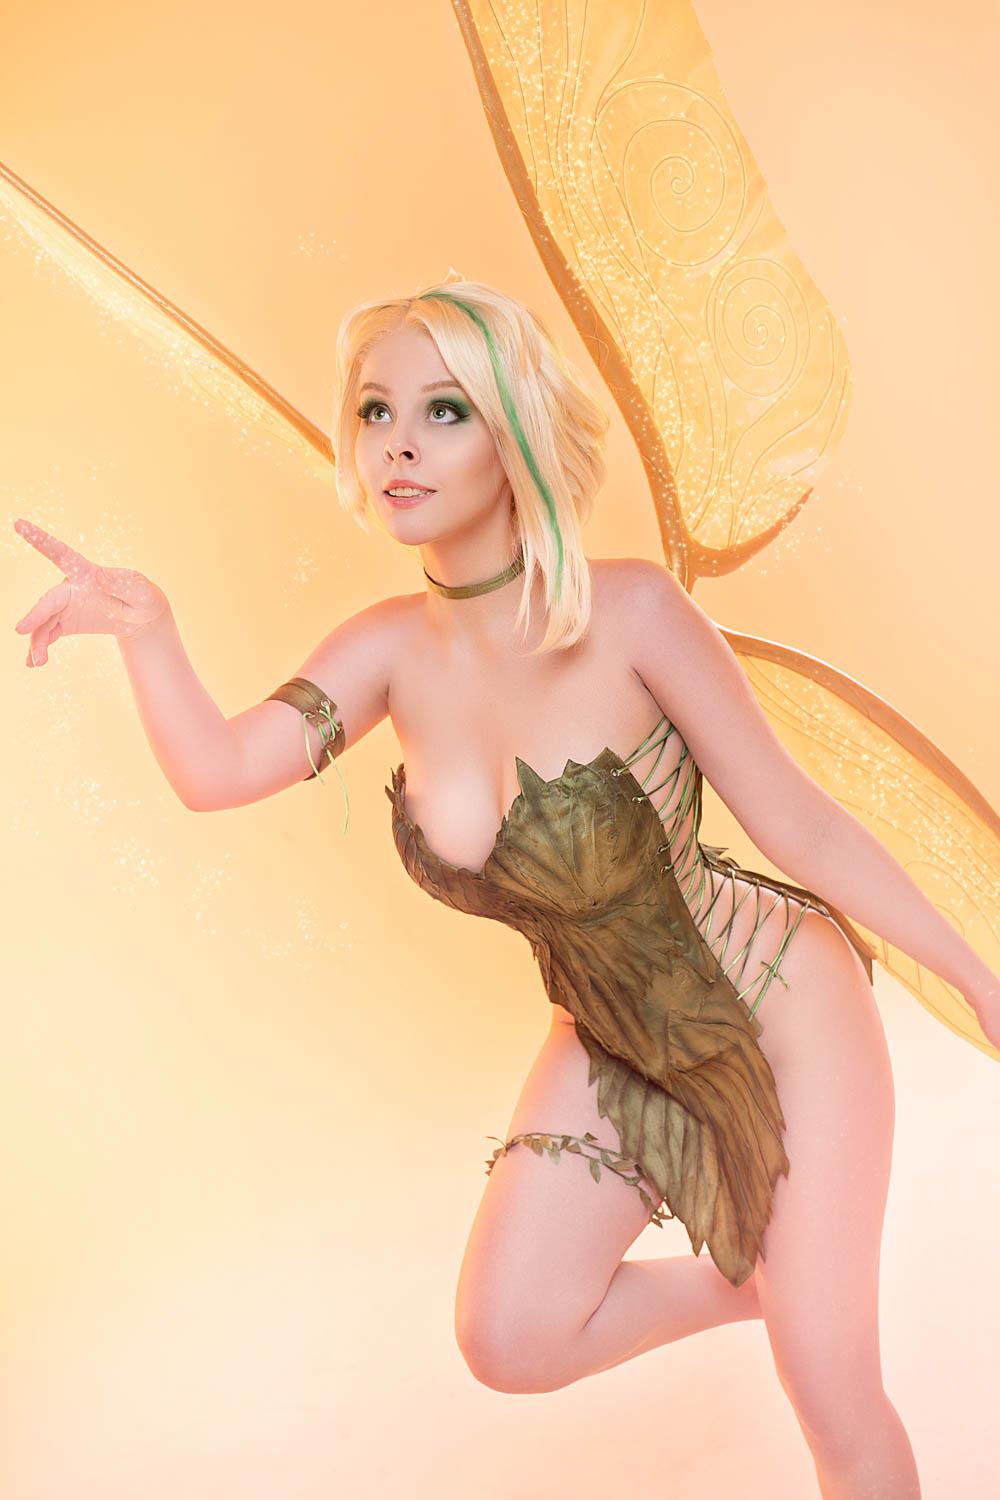 Tinkerbell Cosplay - Tinkerbell cosplay by Helly Valentine